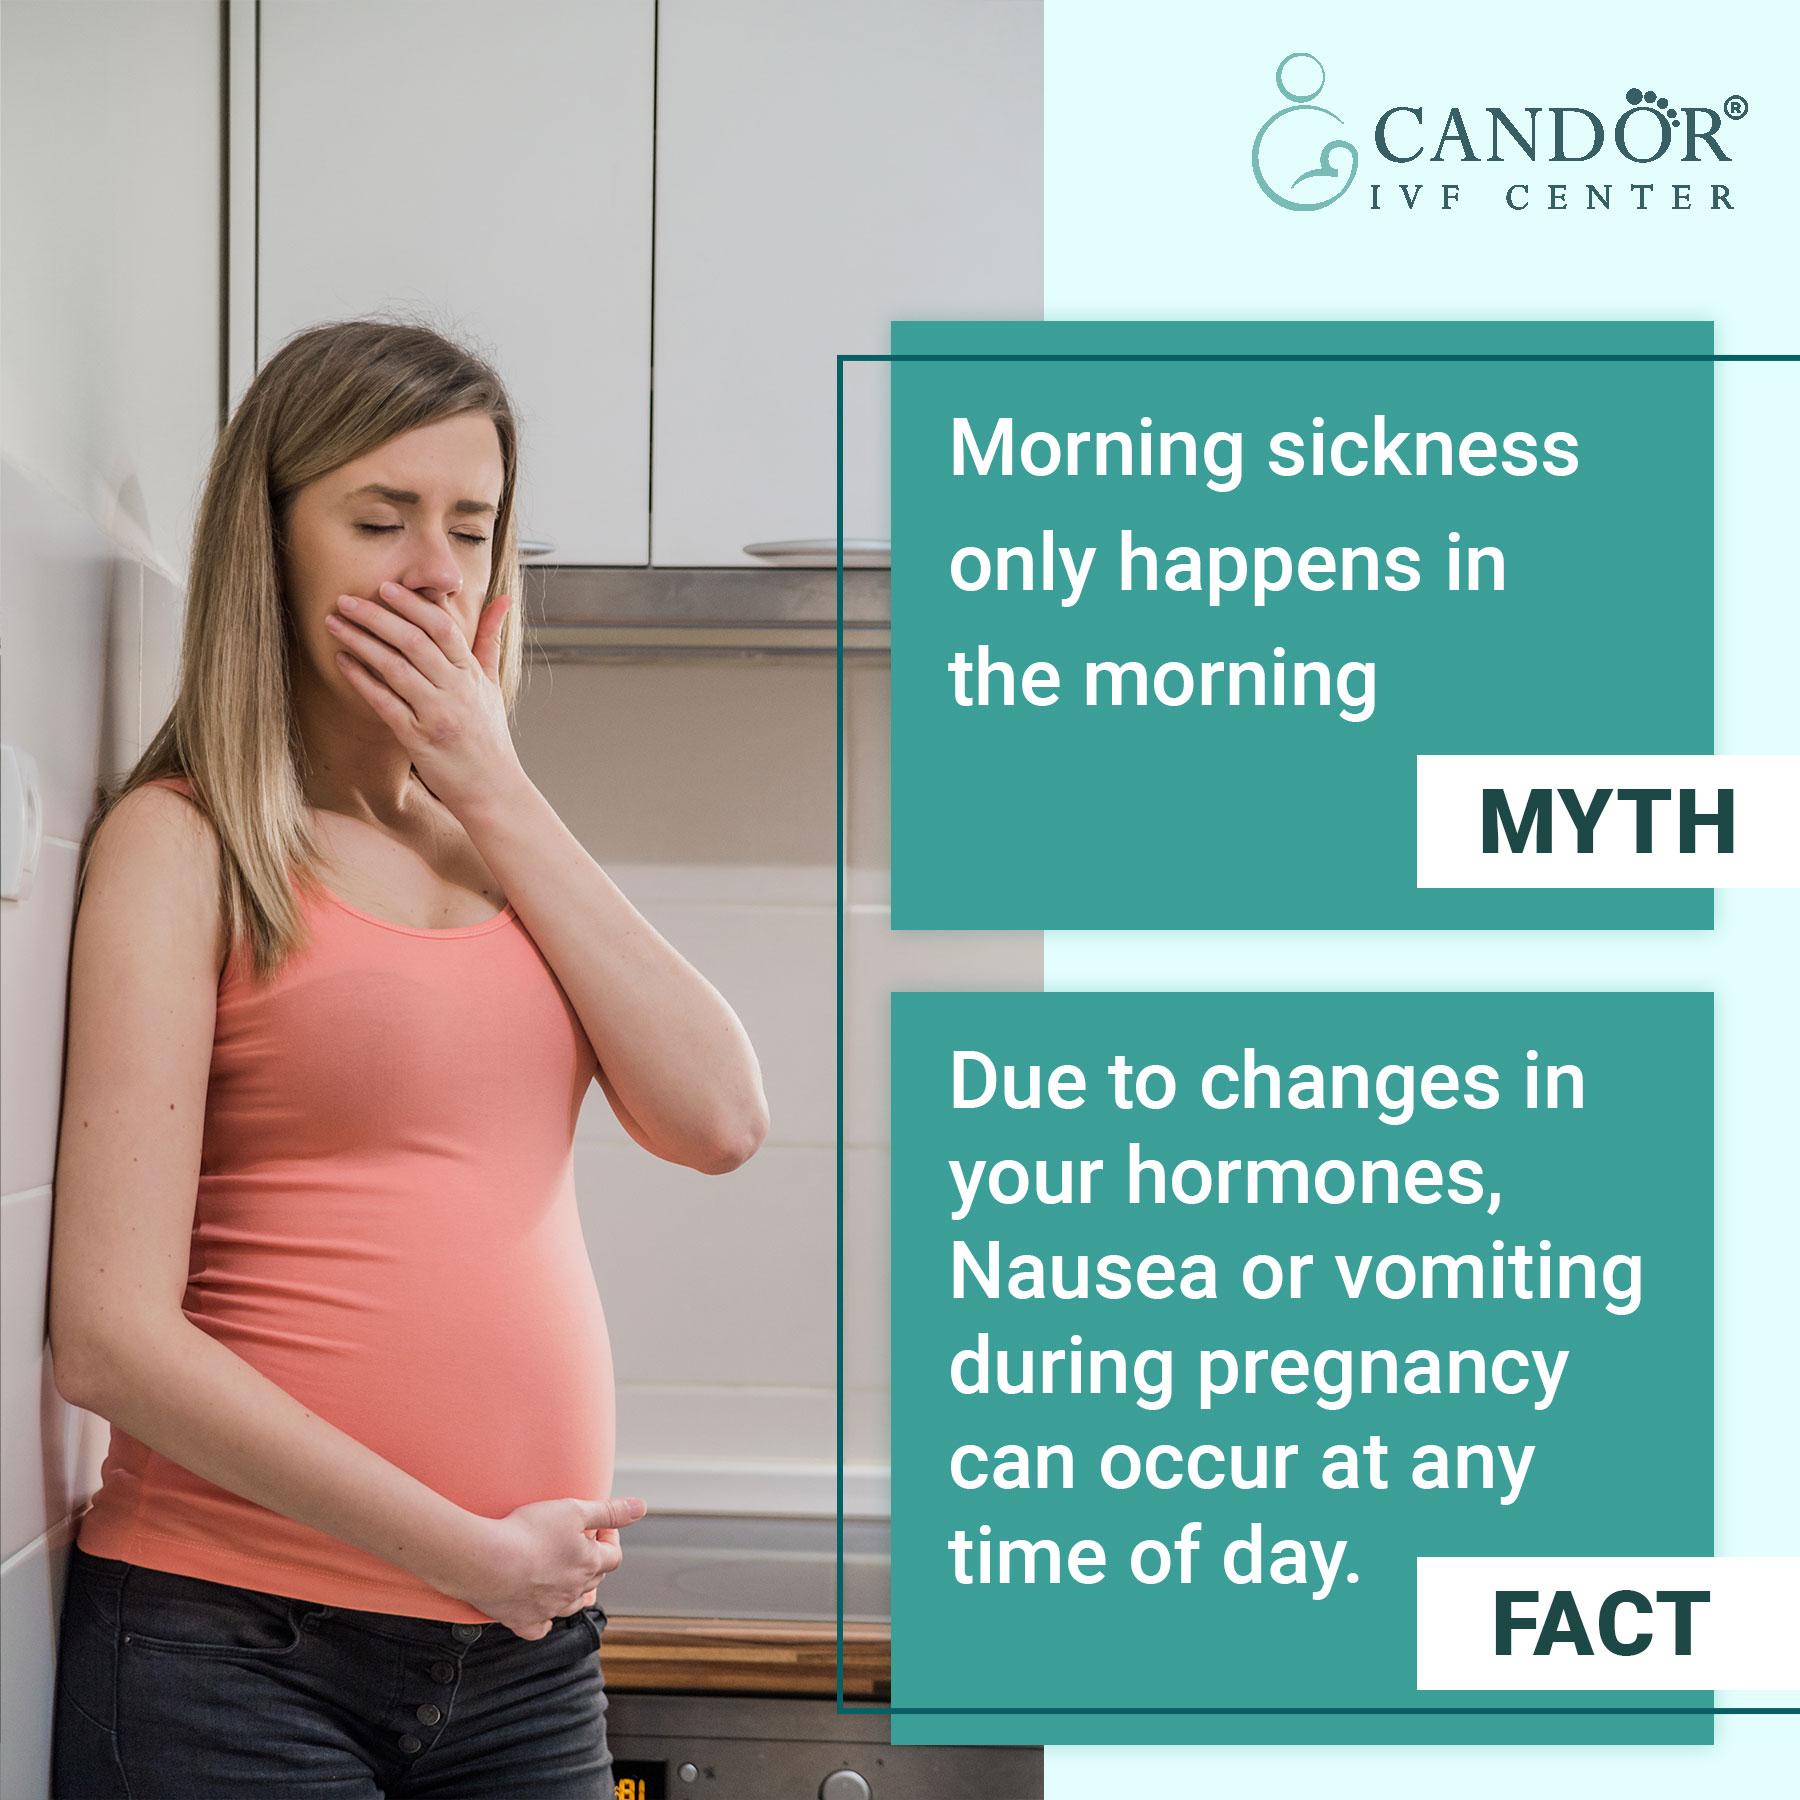 Myth And Fact About Pregnancy About Morning Sickness Justpaste It